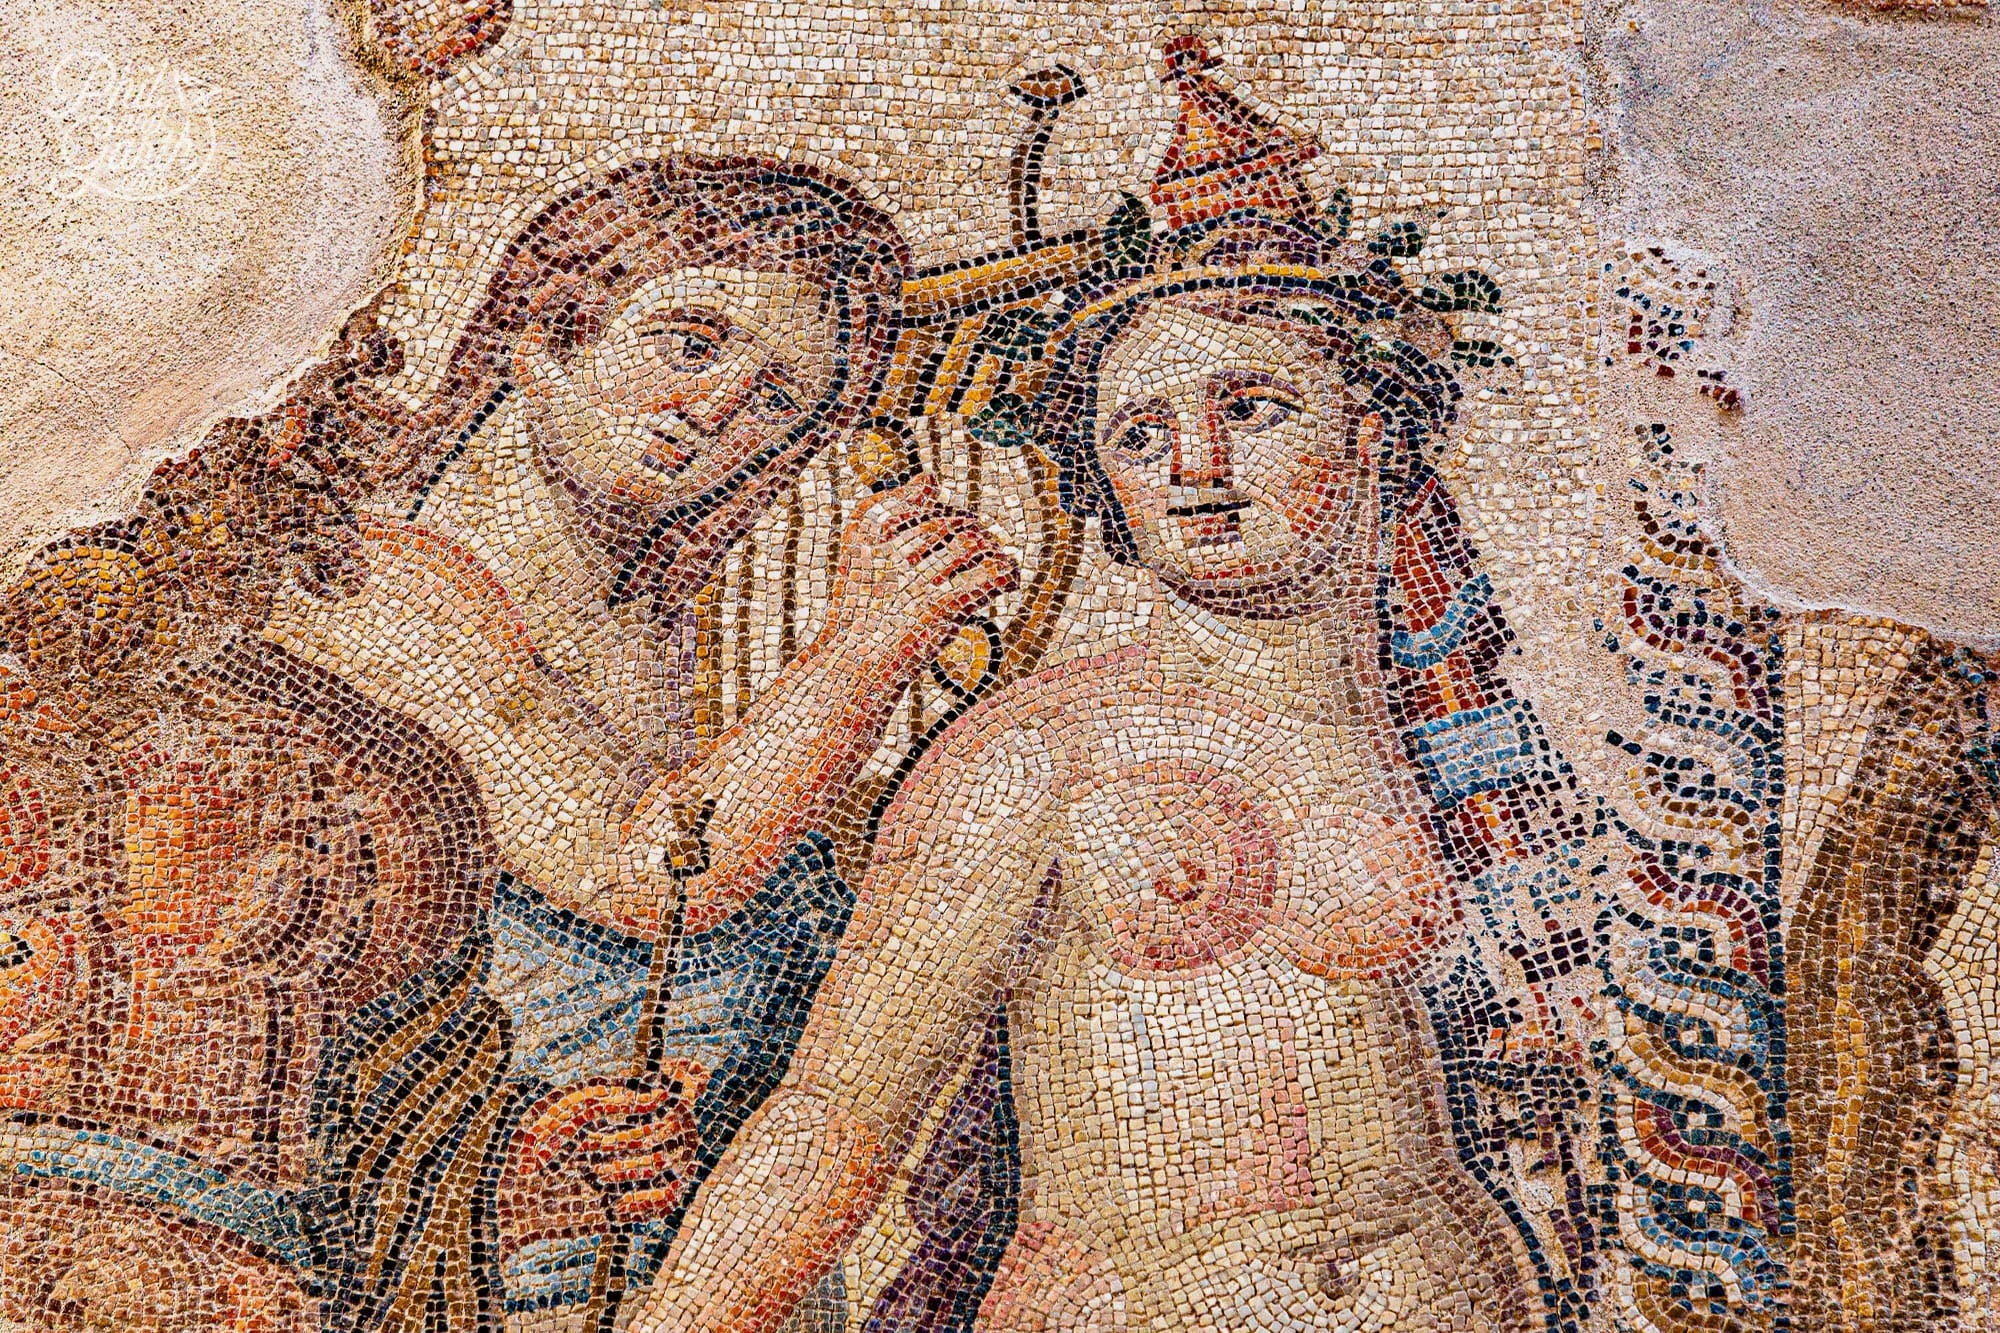 The mosaic of Triumph of Dionysos - Centaur and Maenad inside the House of Aion